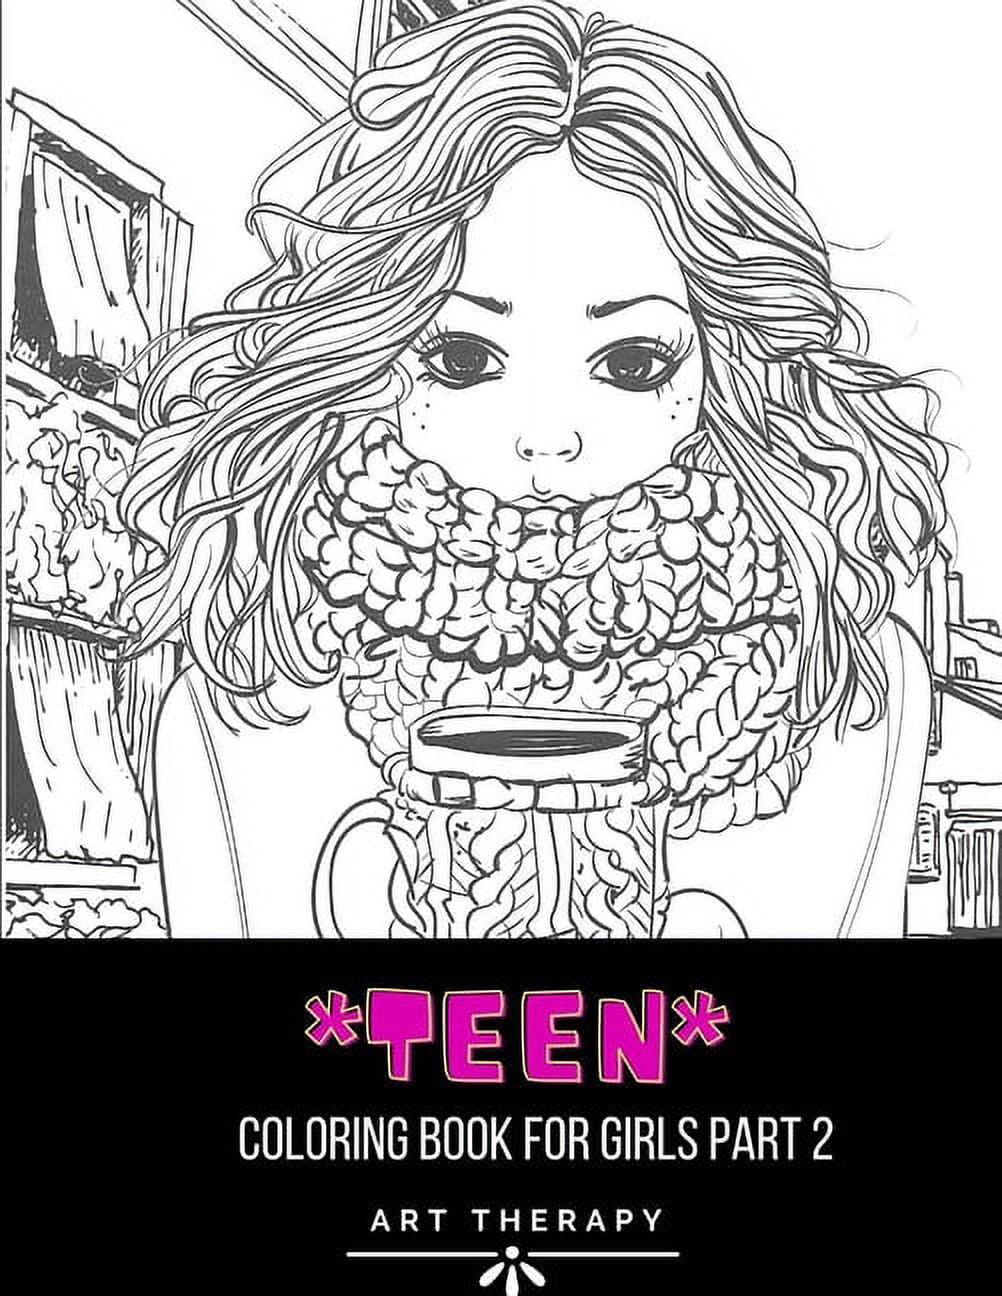 Teen Coloring Books For Girls: Detailed drawings of older girls